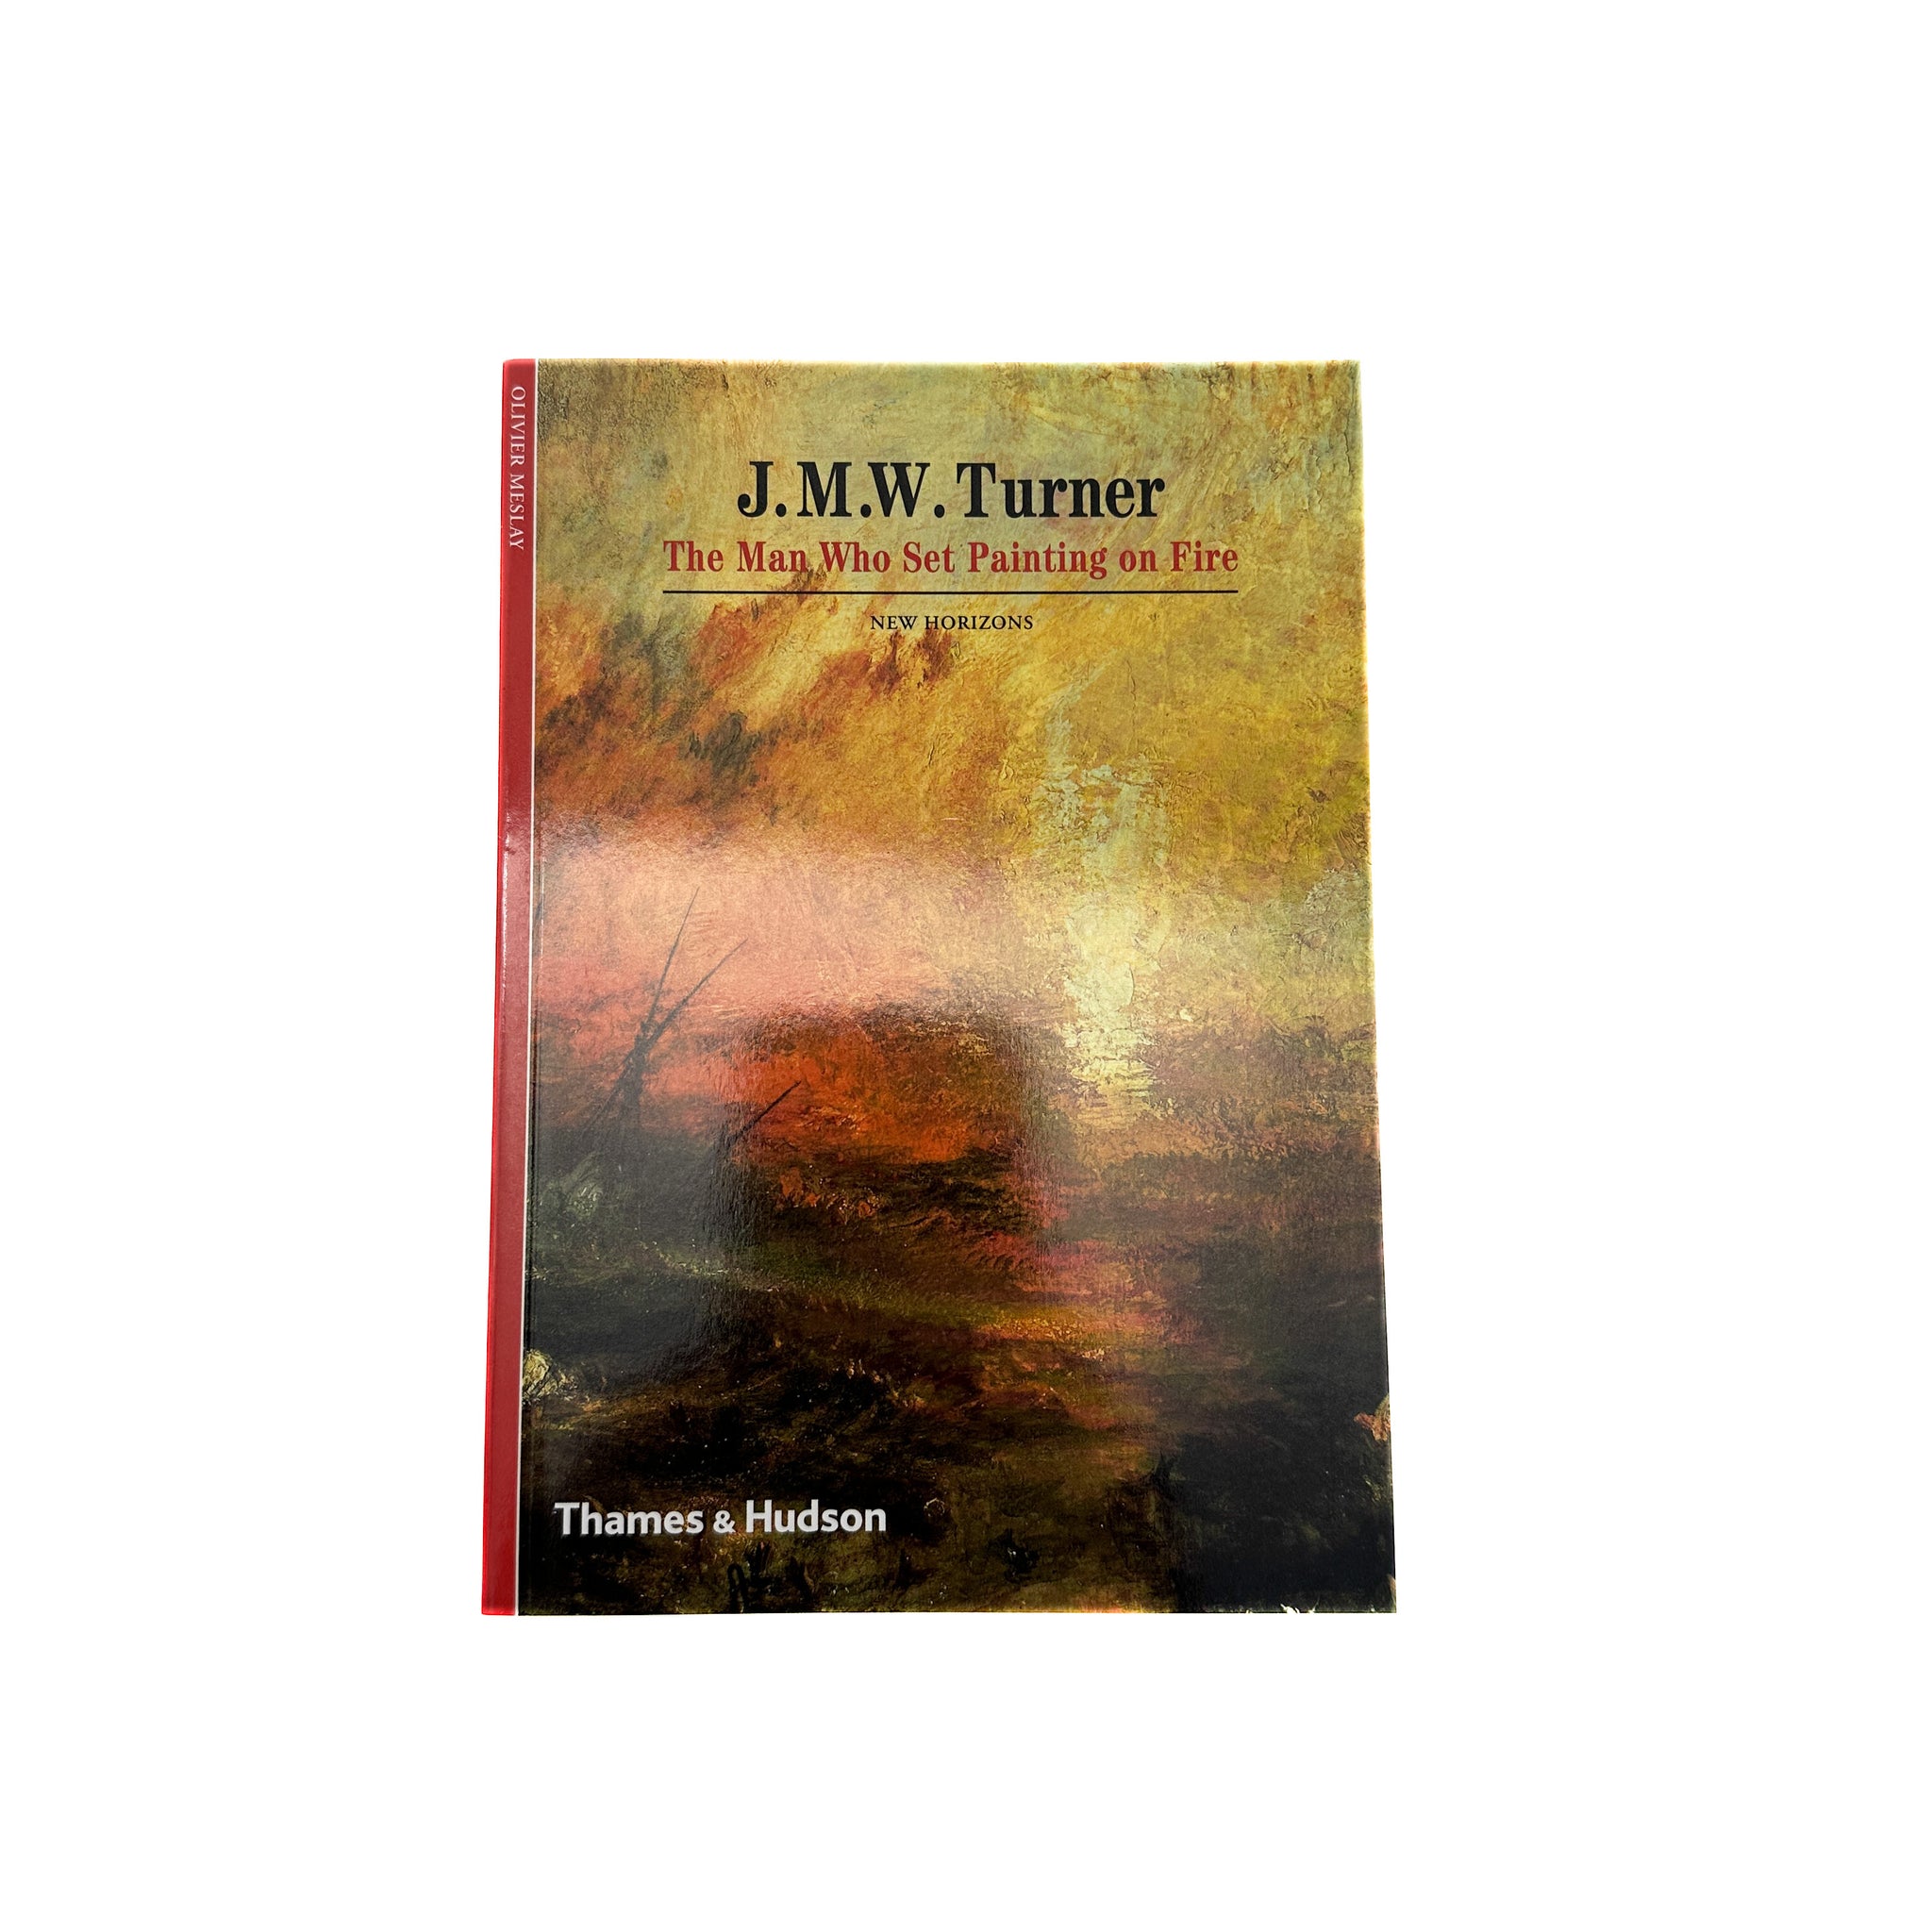 J.M.W.Turner The Man Who Set Painting on Fire